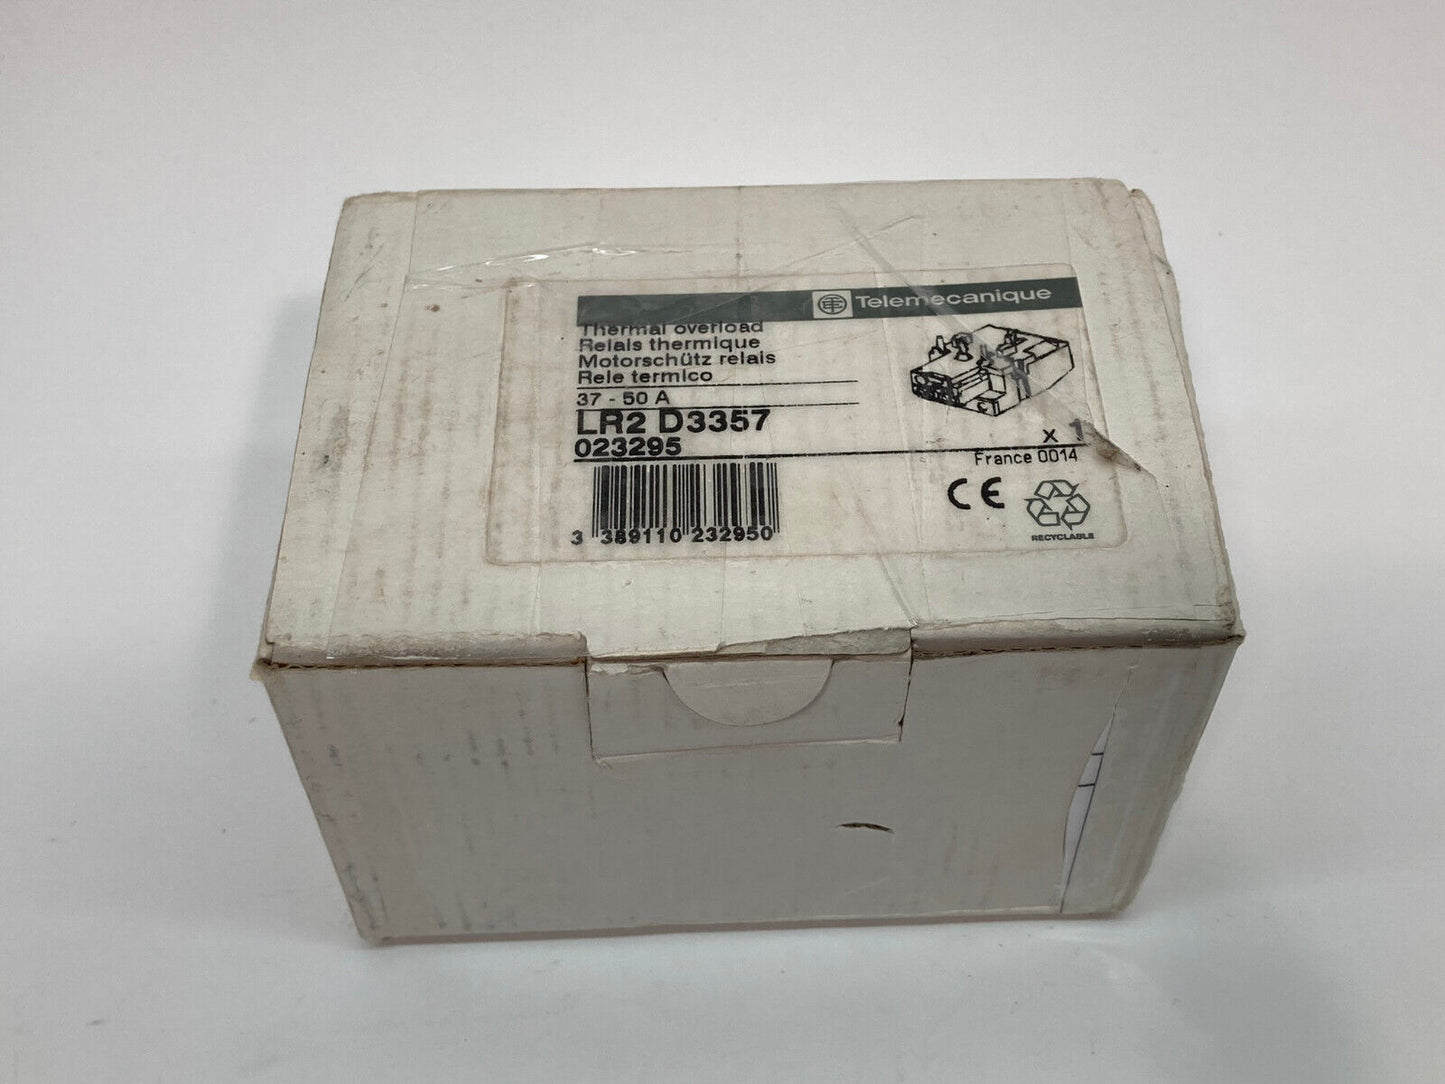 New In Box TELEMECANIQUE LR2-D3357 Thermal Overload relay 37-50 A